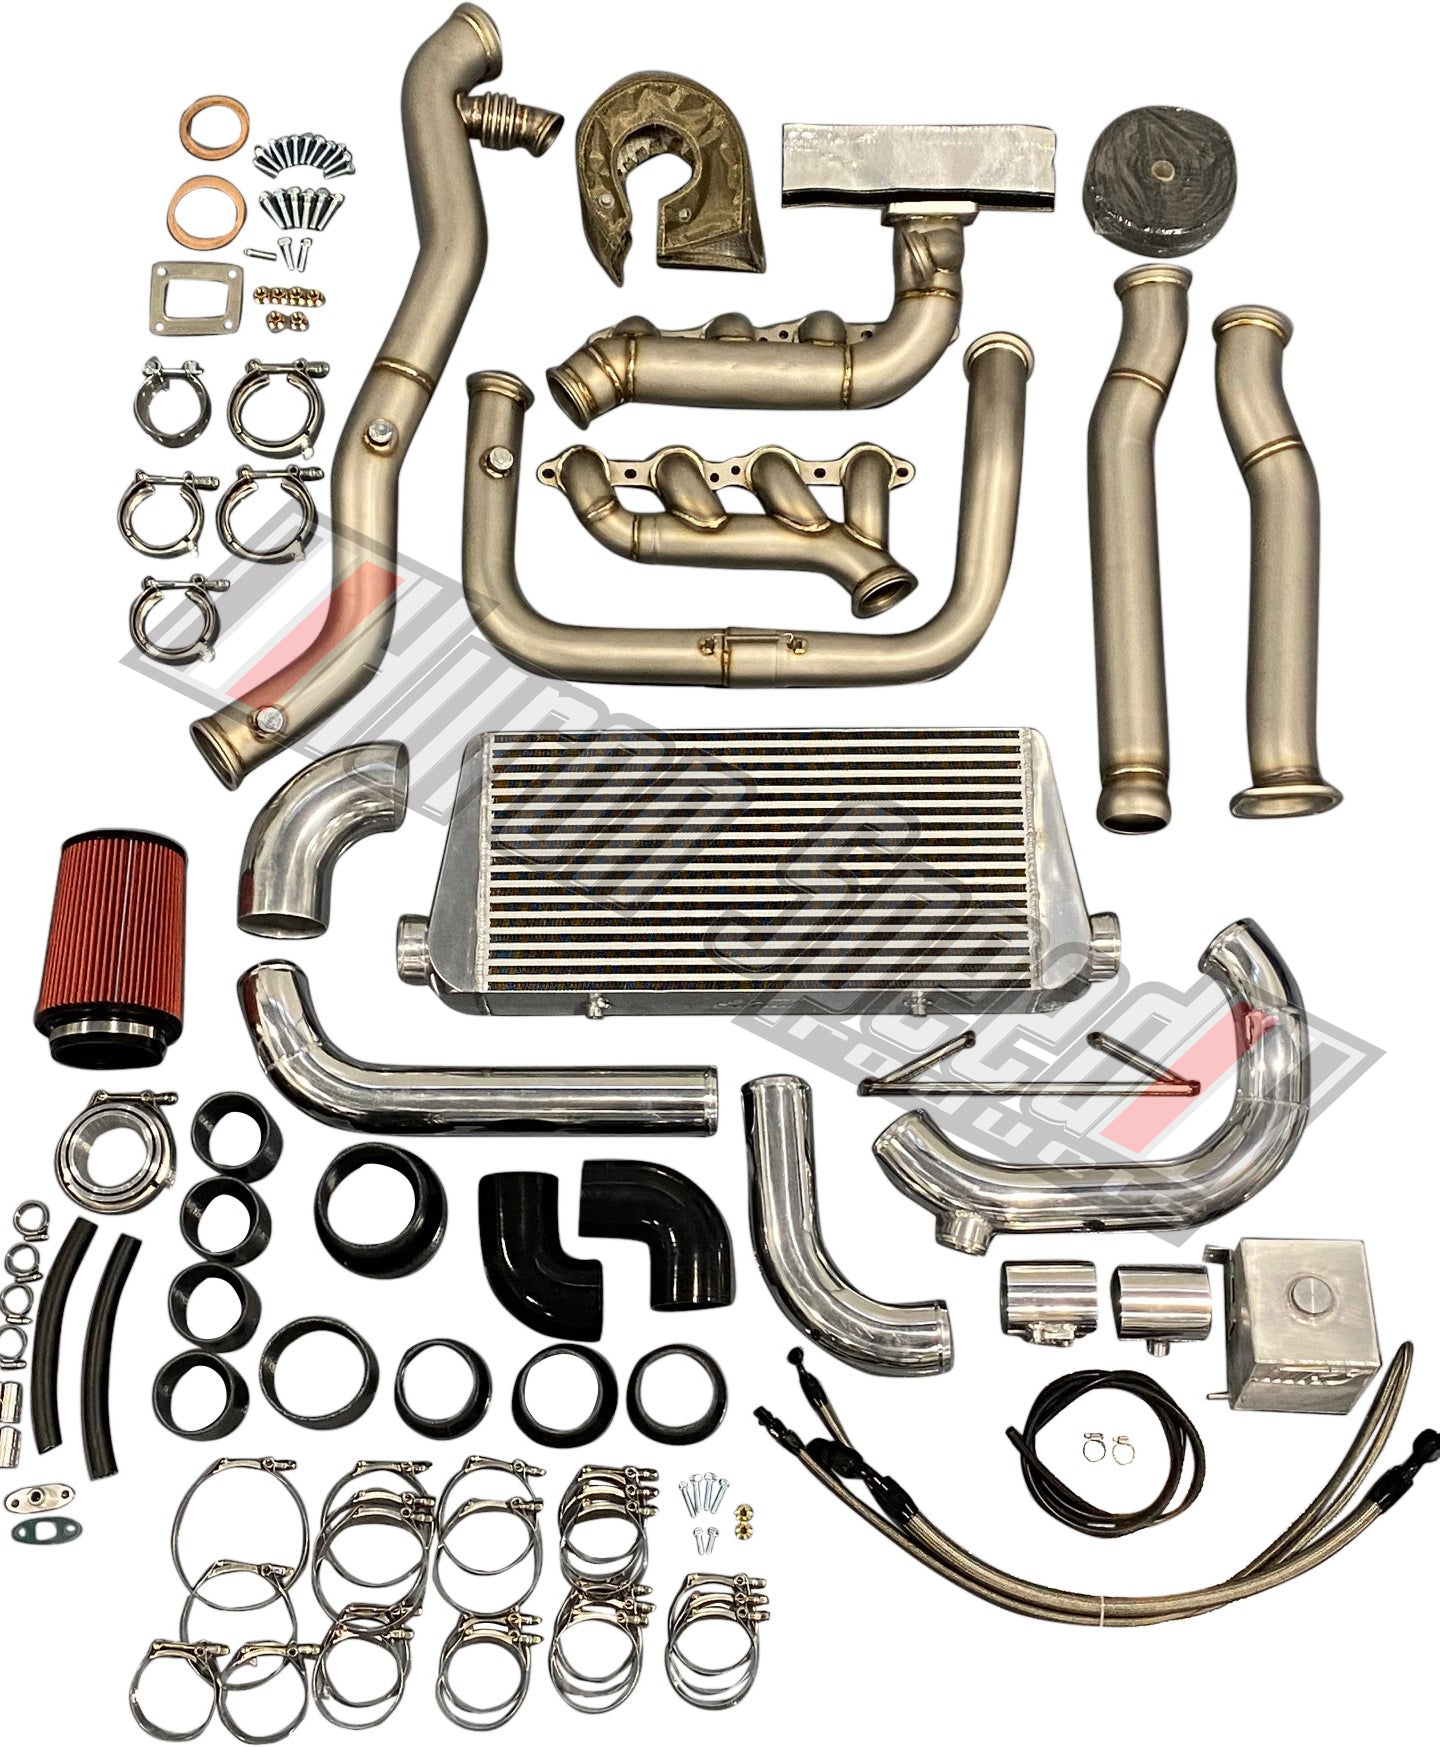 Huron Speed V4 T4 Kit FINAL PAYMENT – Huron Speed Products